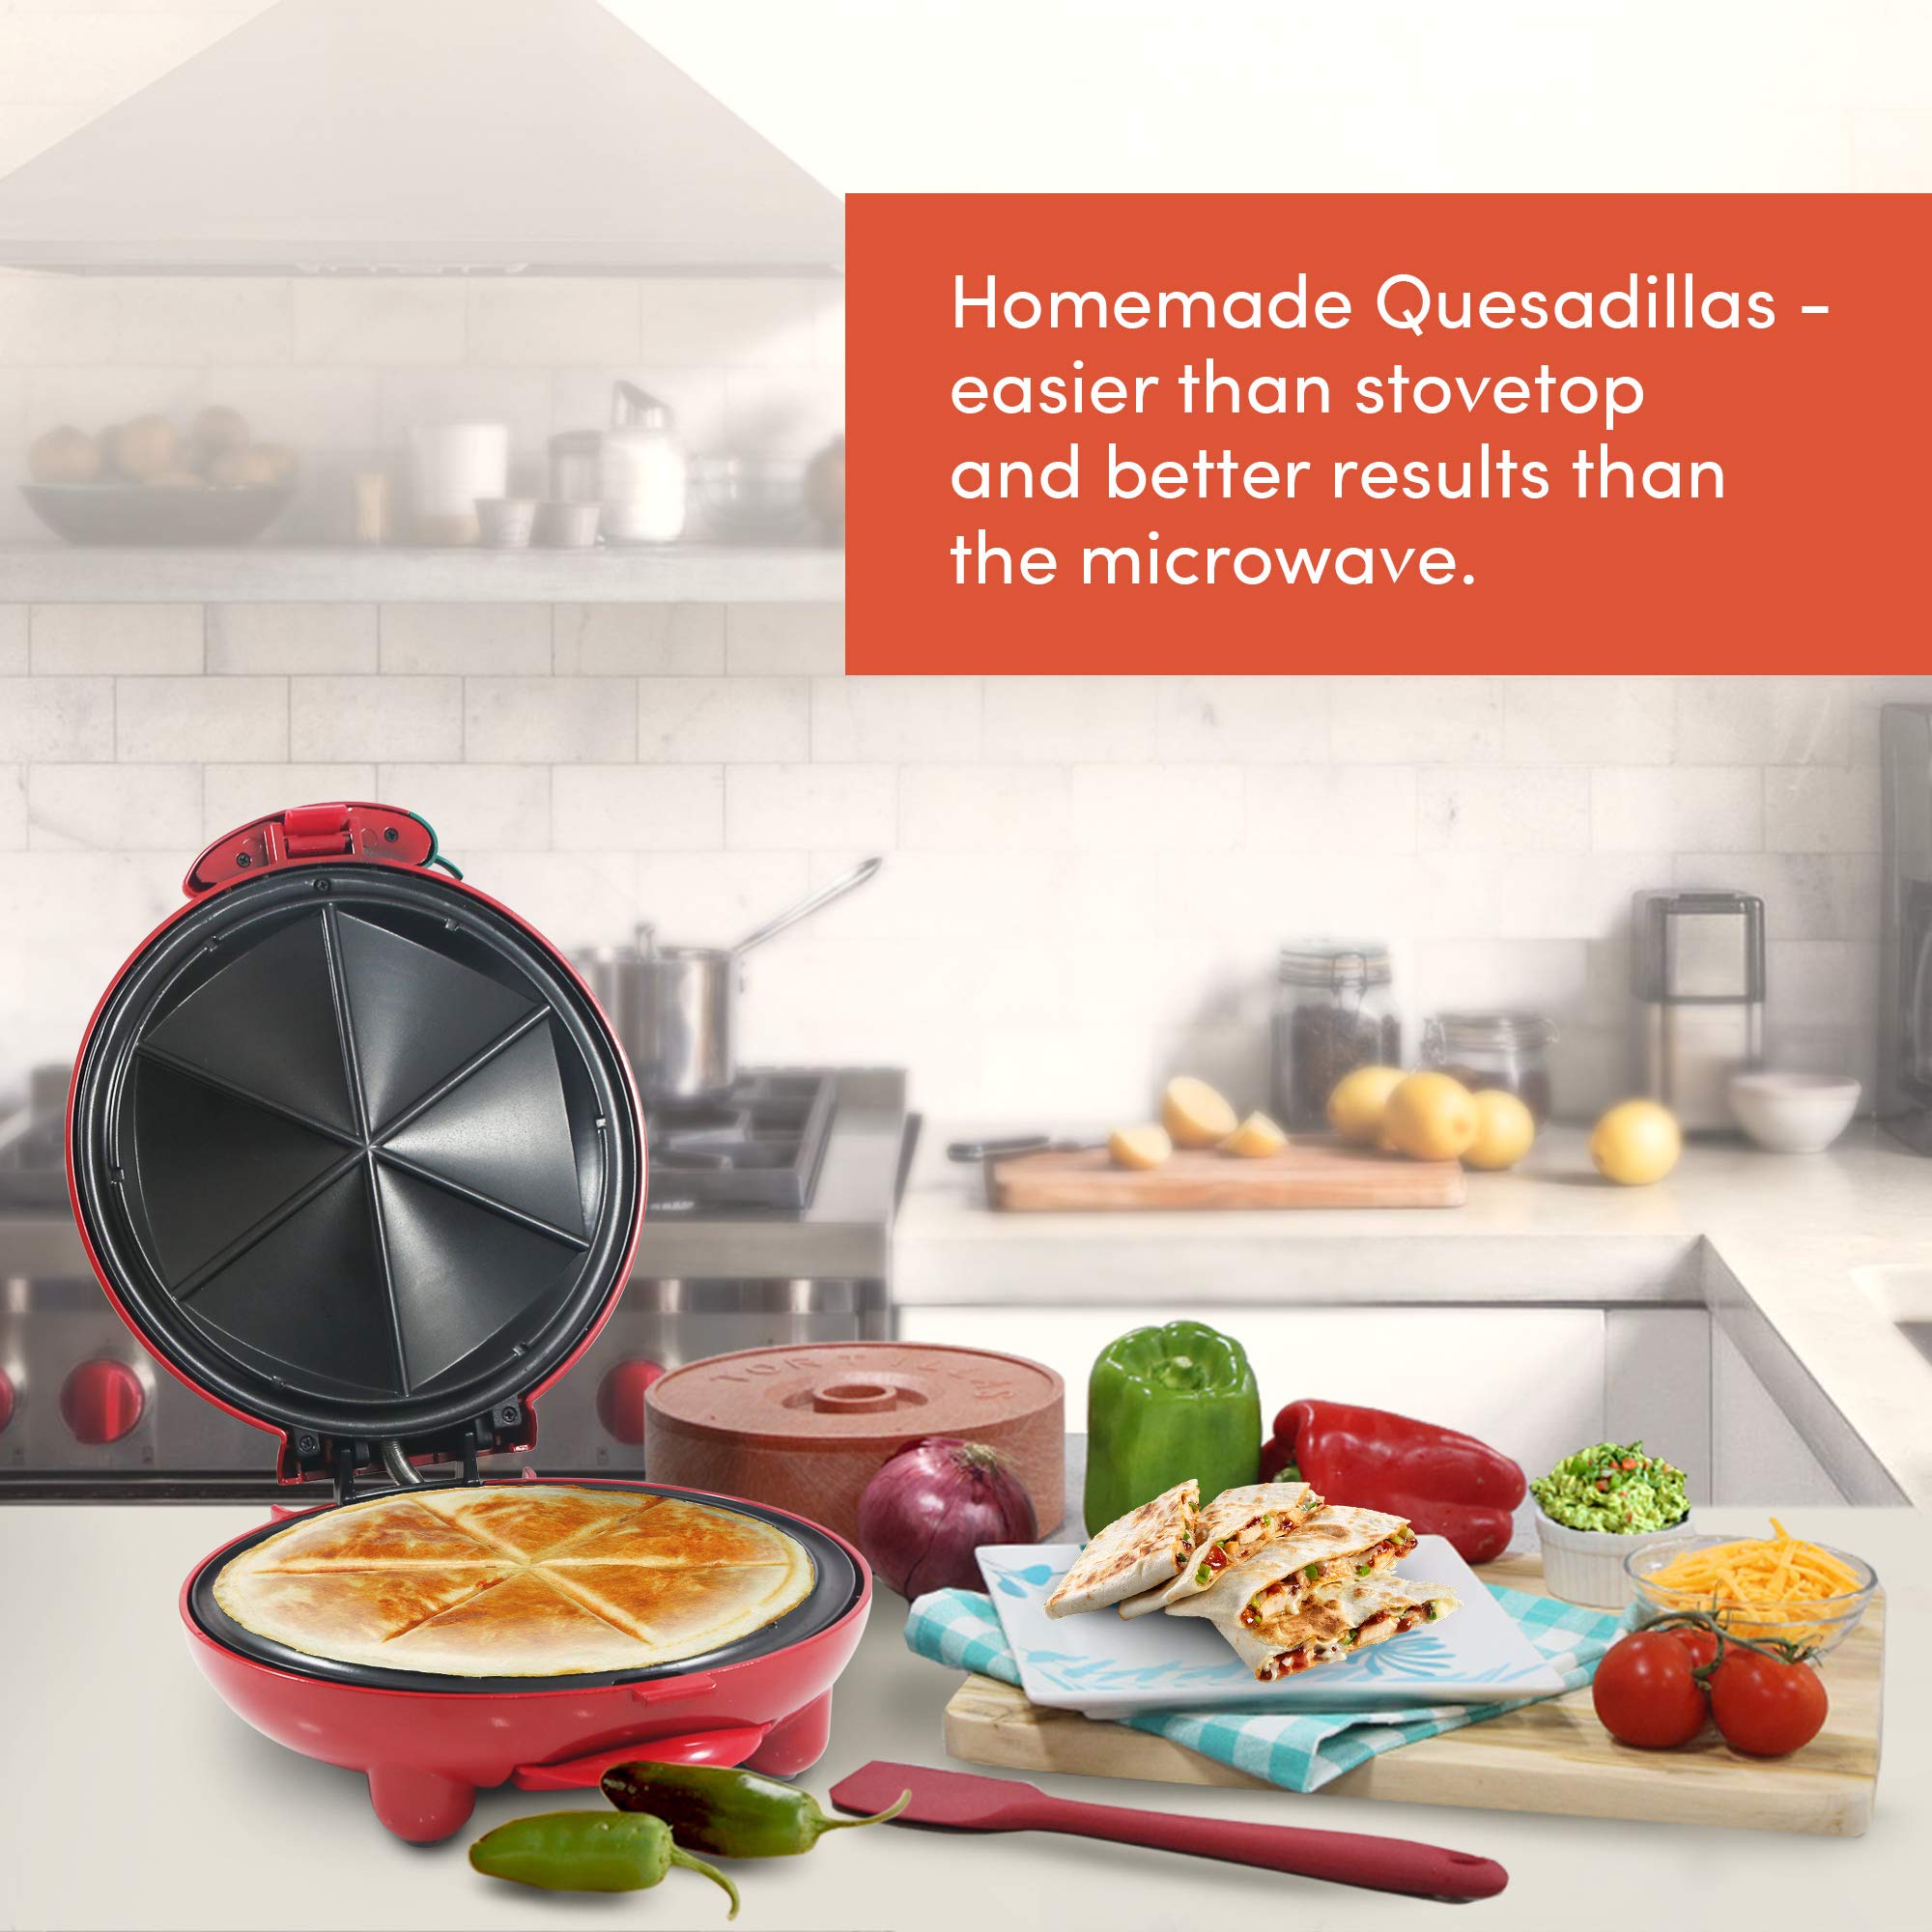 Elite Gourmet EQD413 Non-Stick Electric, Mexican Taco Tuesday Quesadilla Maker, Easy-Slice 6-Wedge, Grilled Cheese, 8 Inch, Red